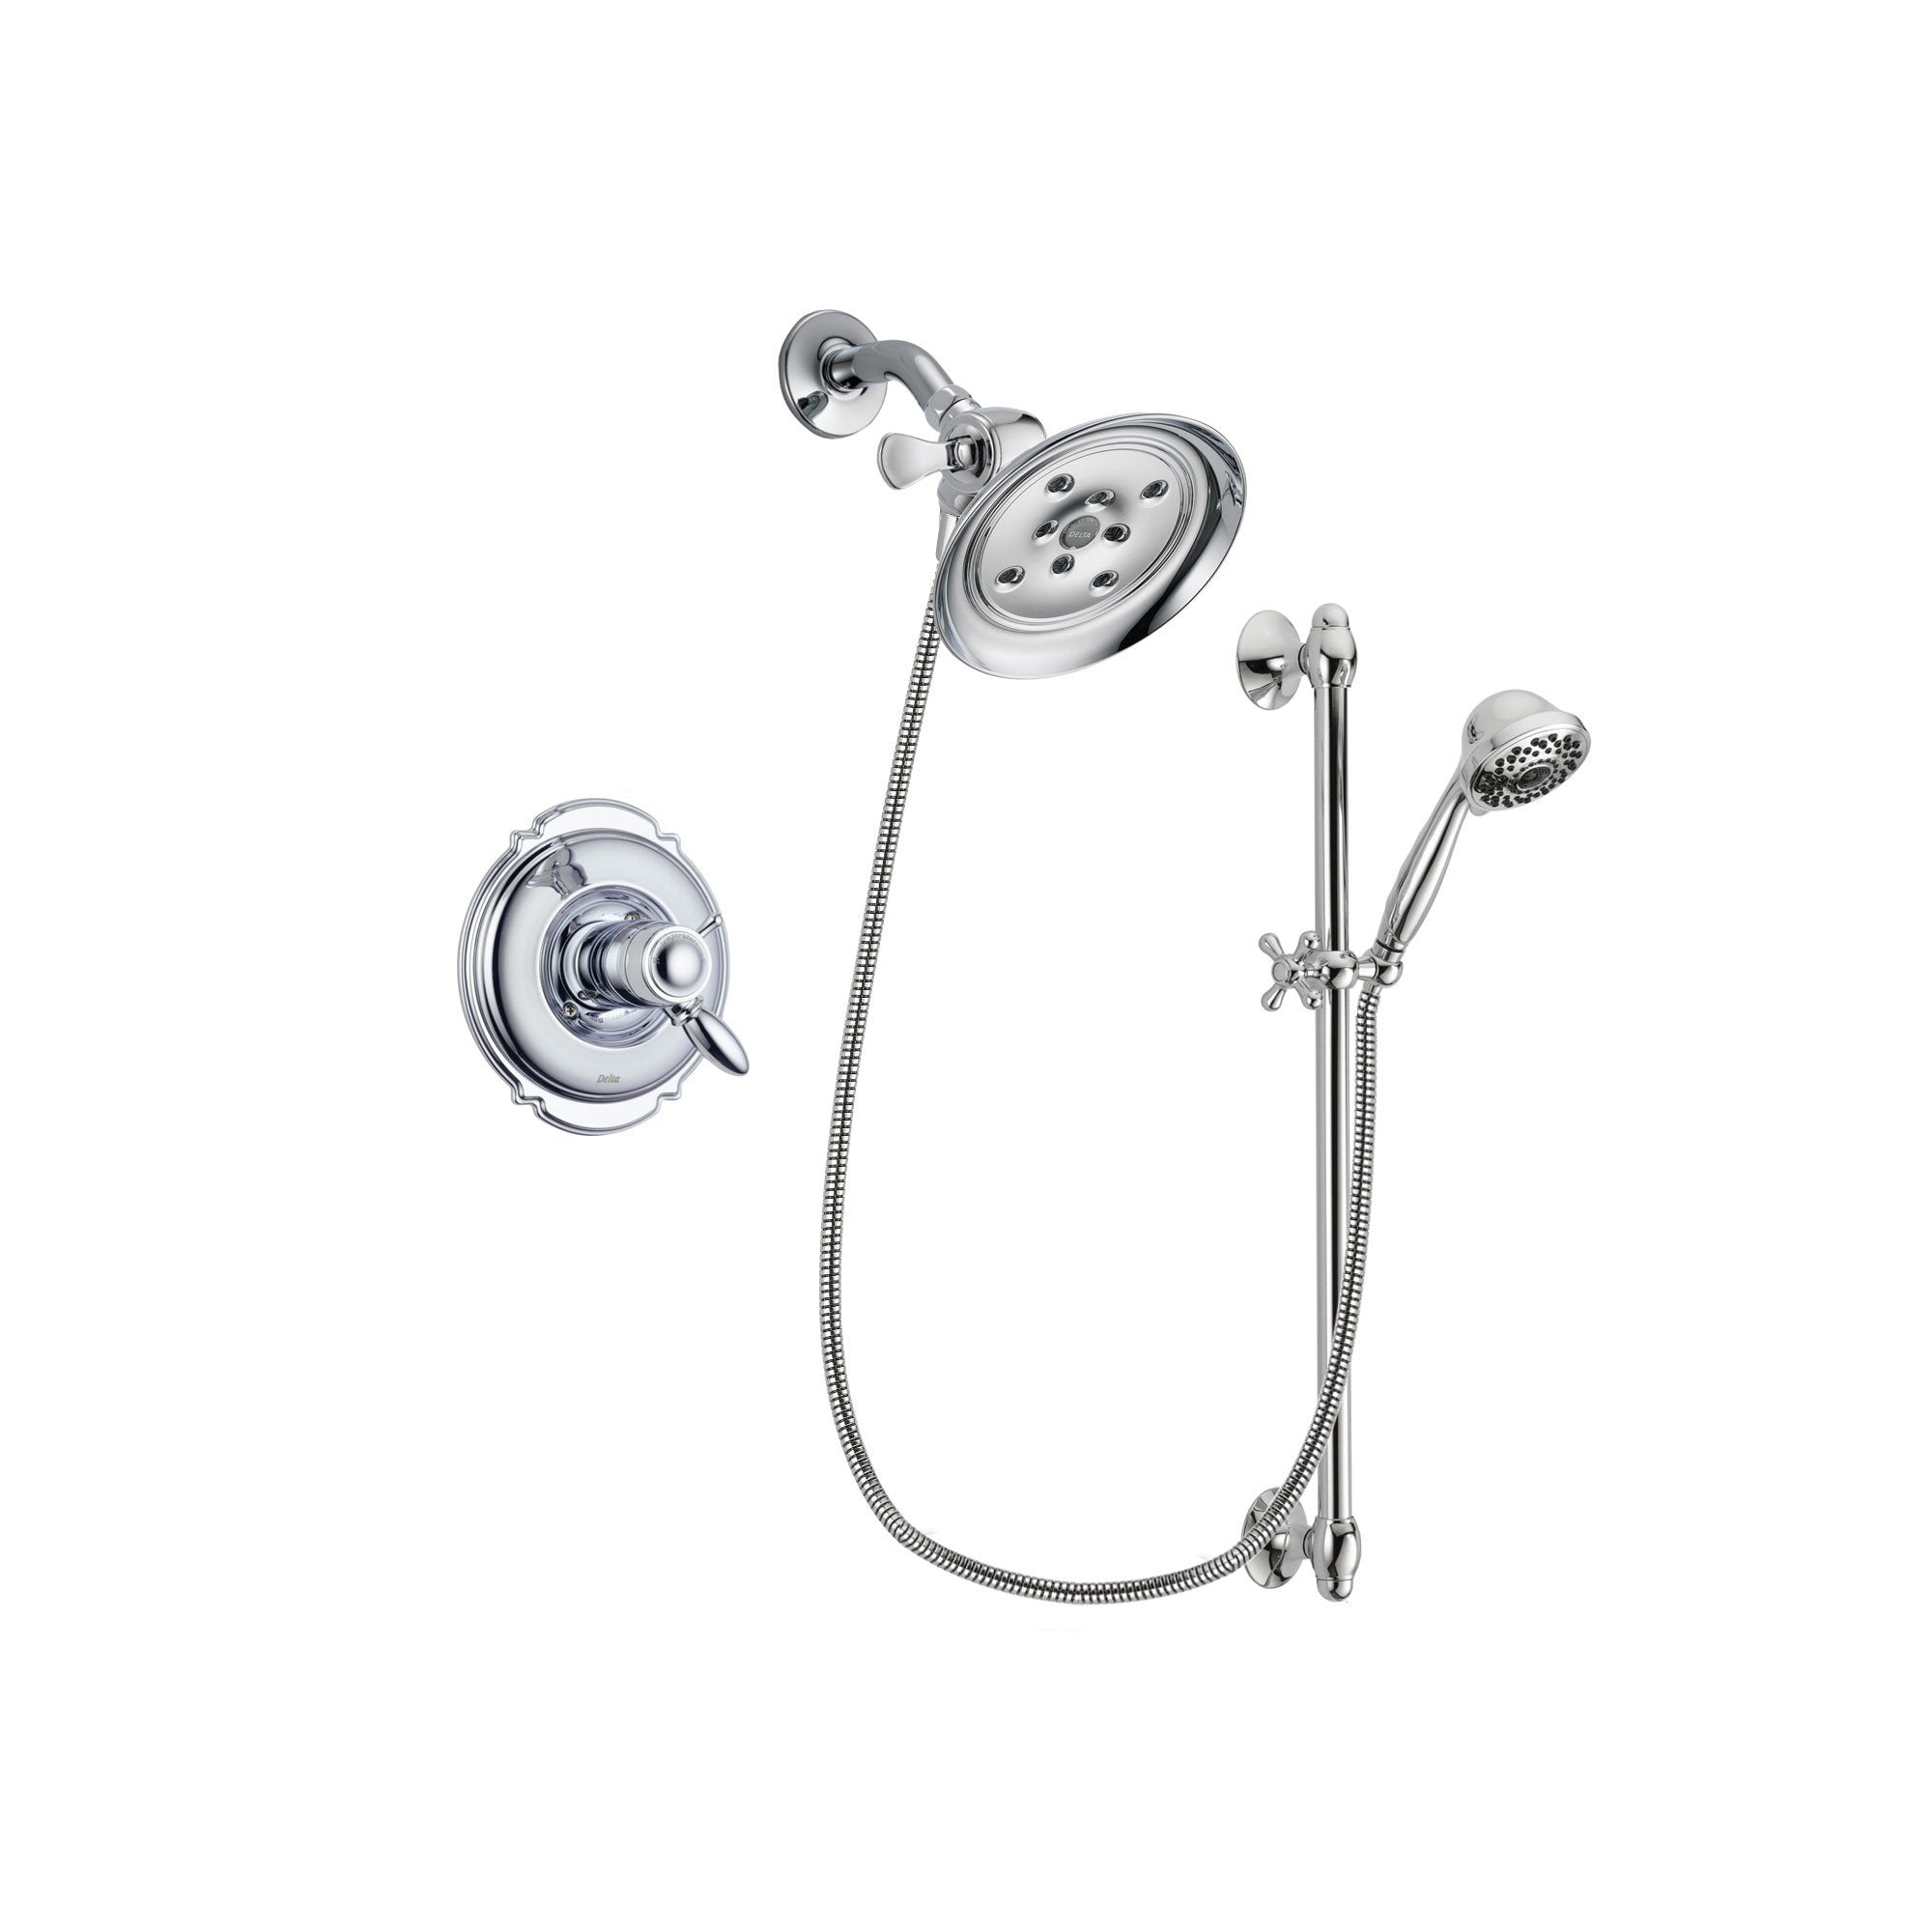 Delta Victorian Chrome Shower Faucet System Package with Hand Shower DSP0632V